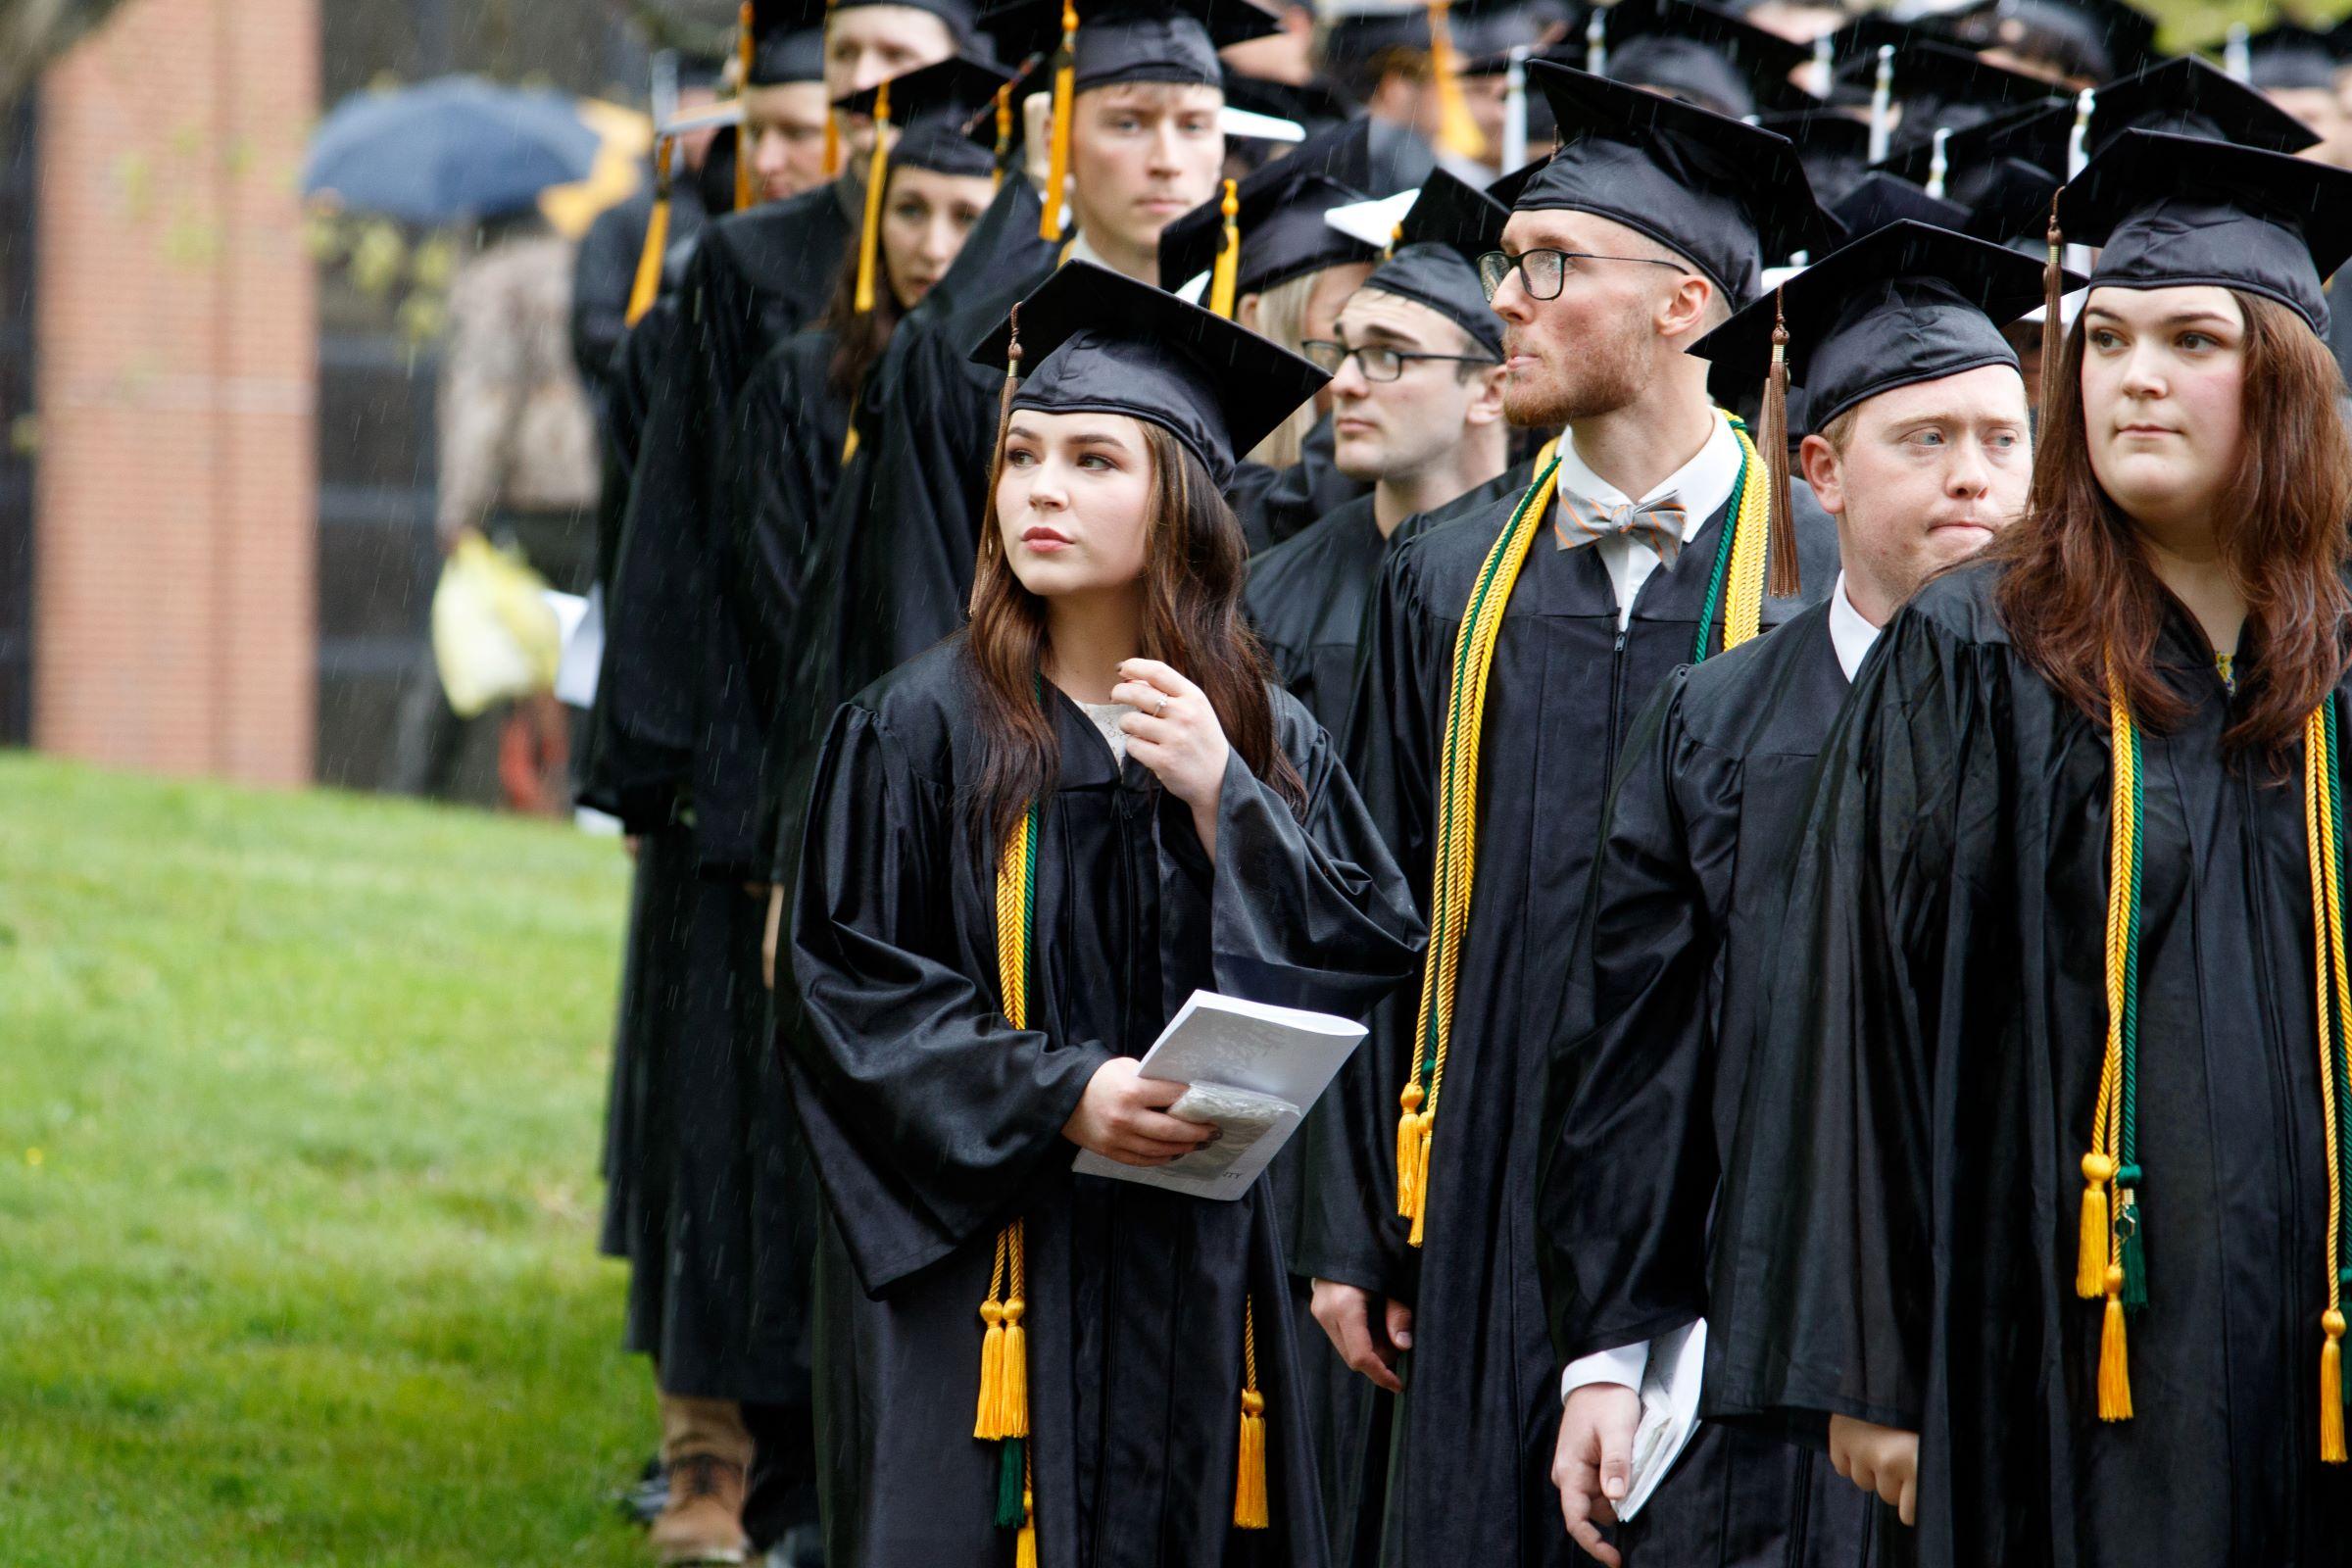 Students prepare to process to Commencement ceremony